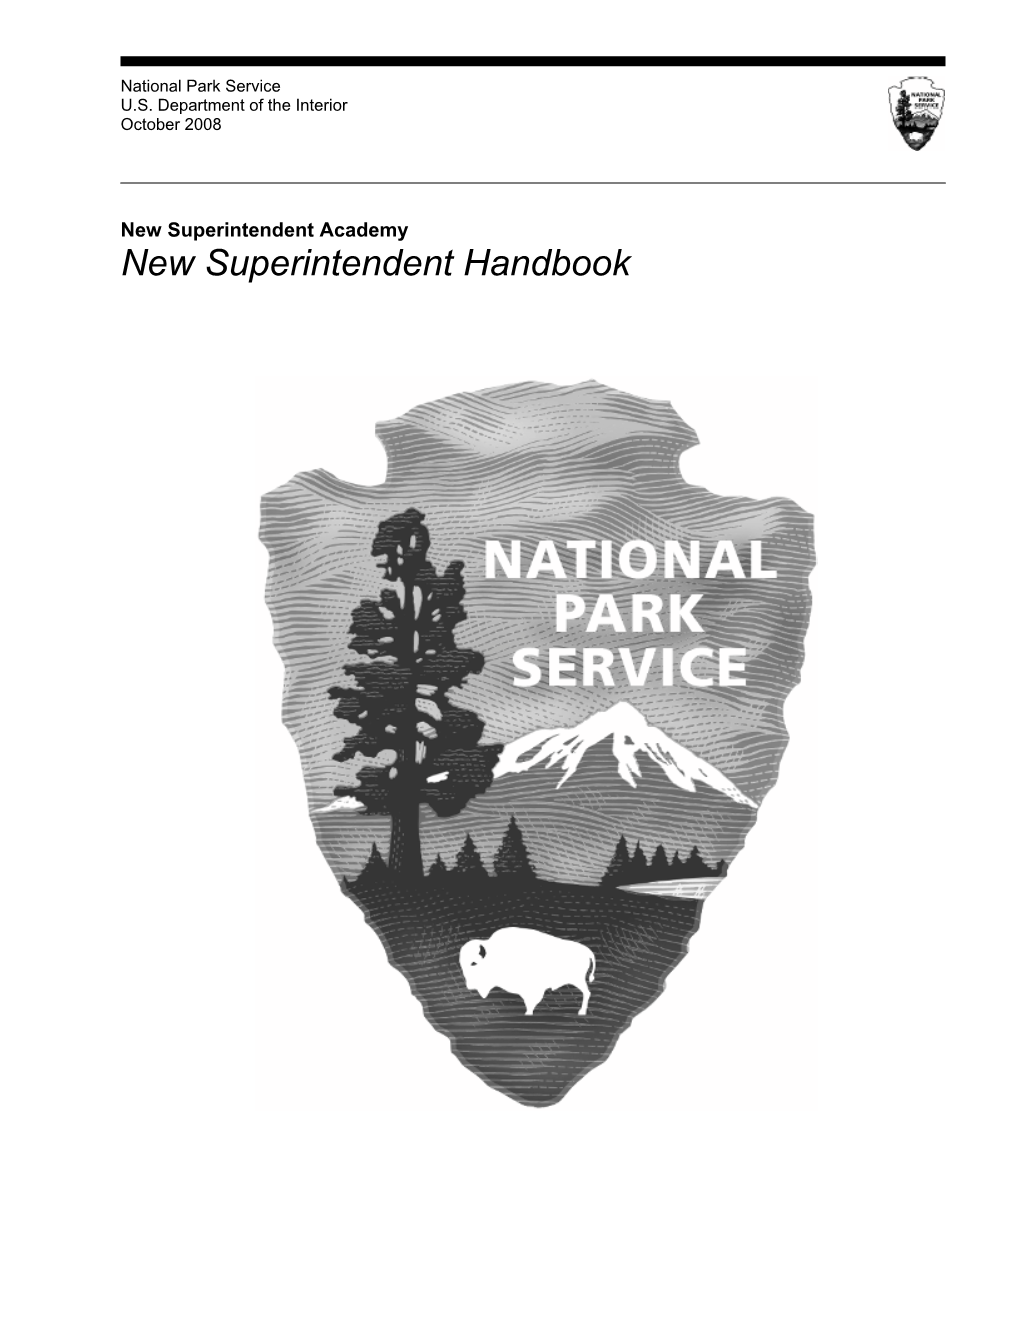 National Park Service Headquarters Organization DIRECTOR Chief of Staff Sue Masica Mary A